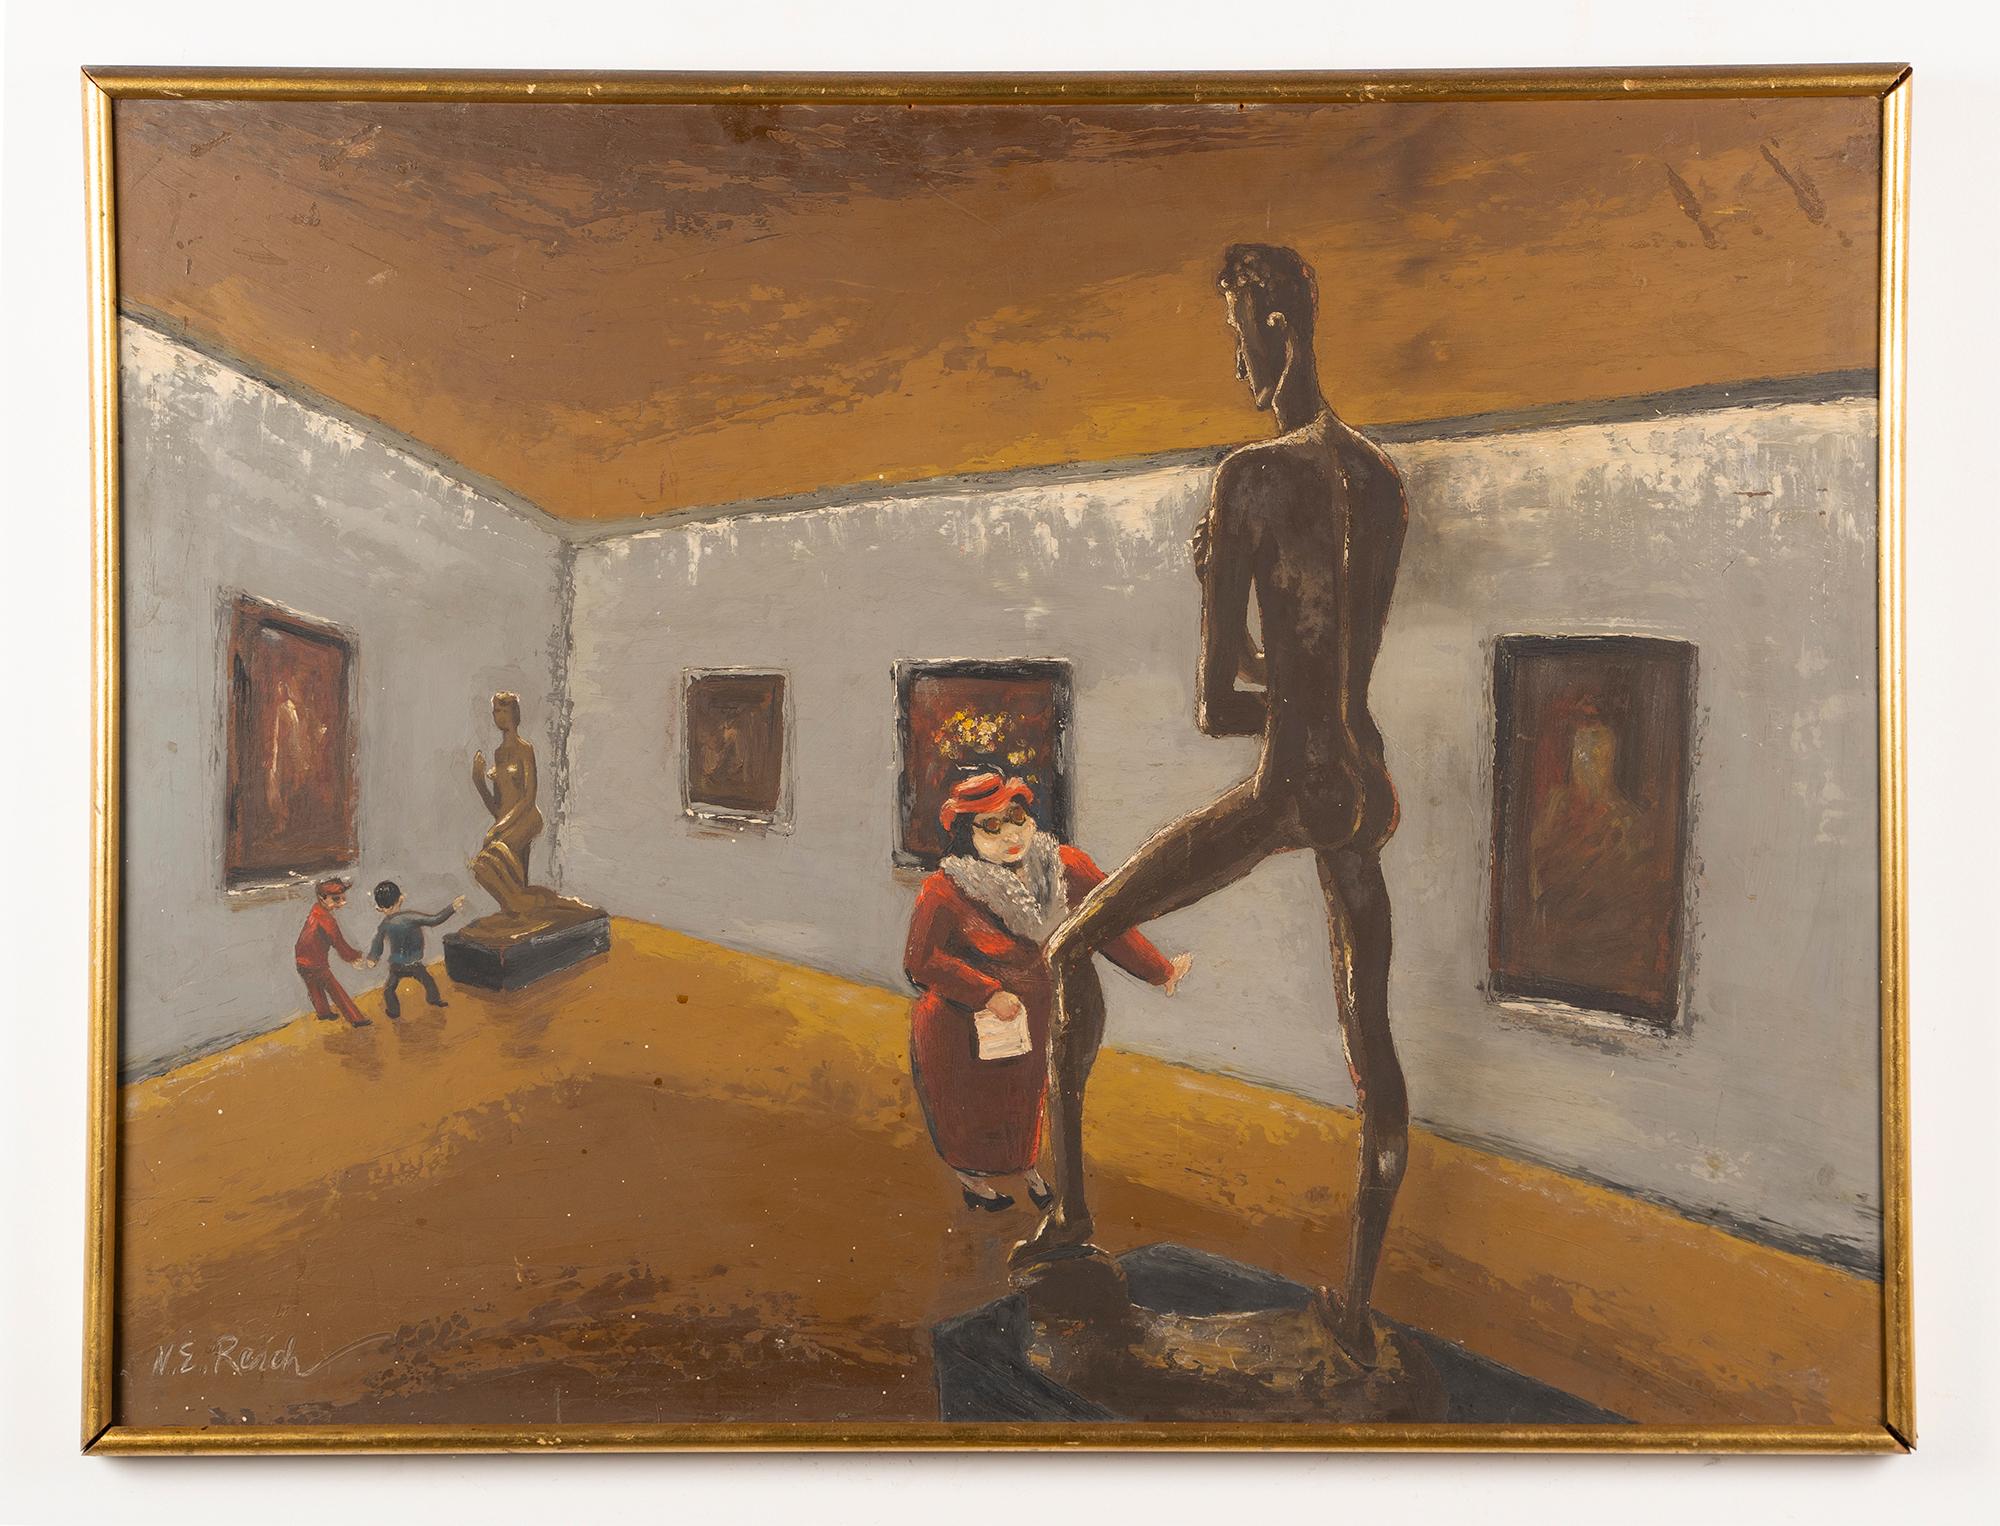 Antique American school museum interior oil painting by Nathaniel E. Reich.  Oil on board, circa 1940.  Signed.  Image size, 32L x 24H.  Housed in a period wood frame.